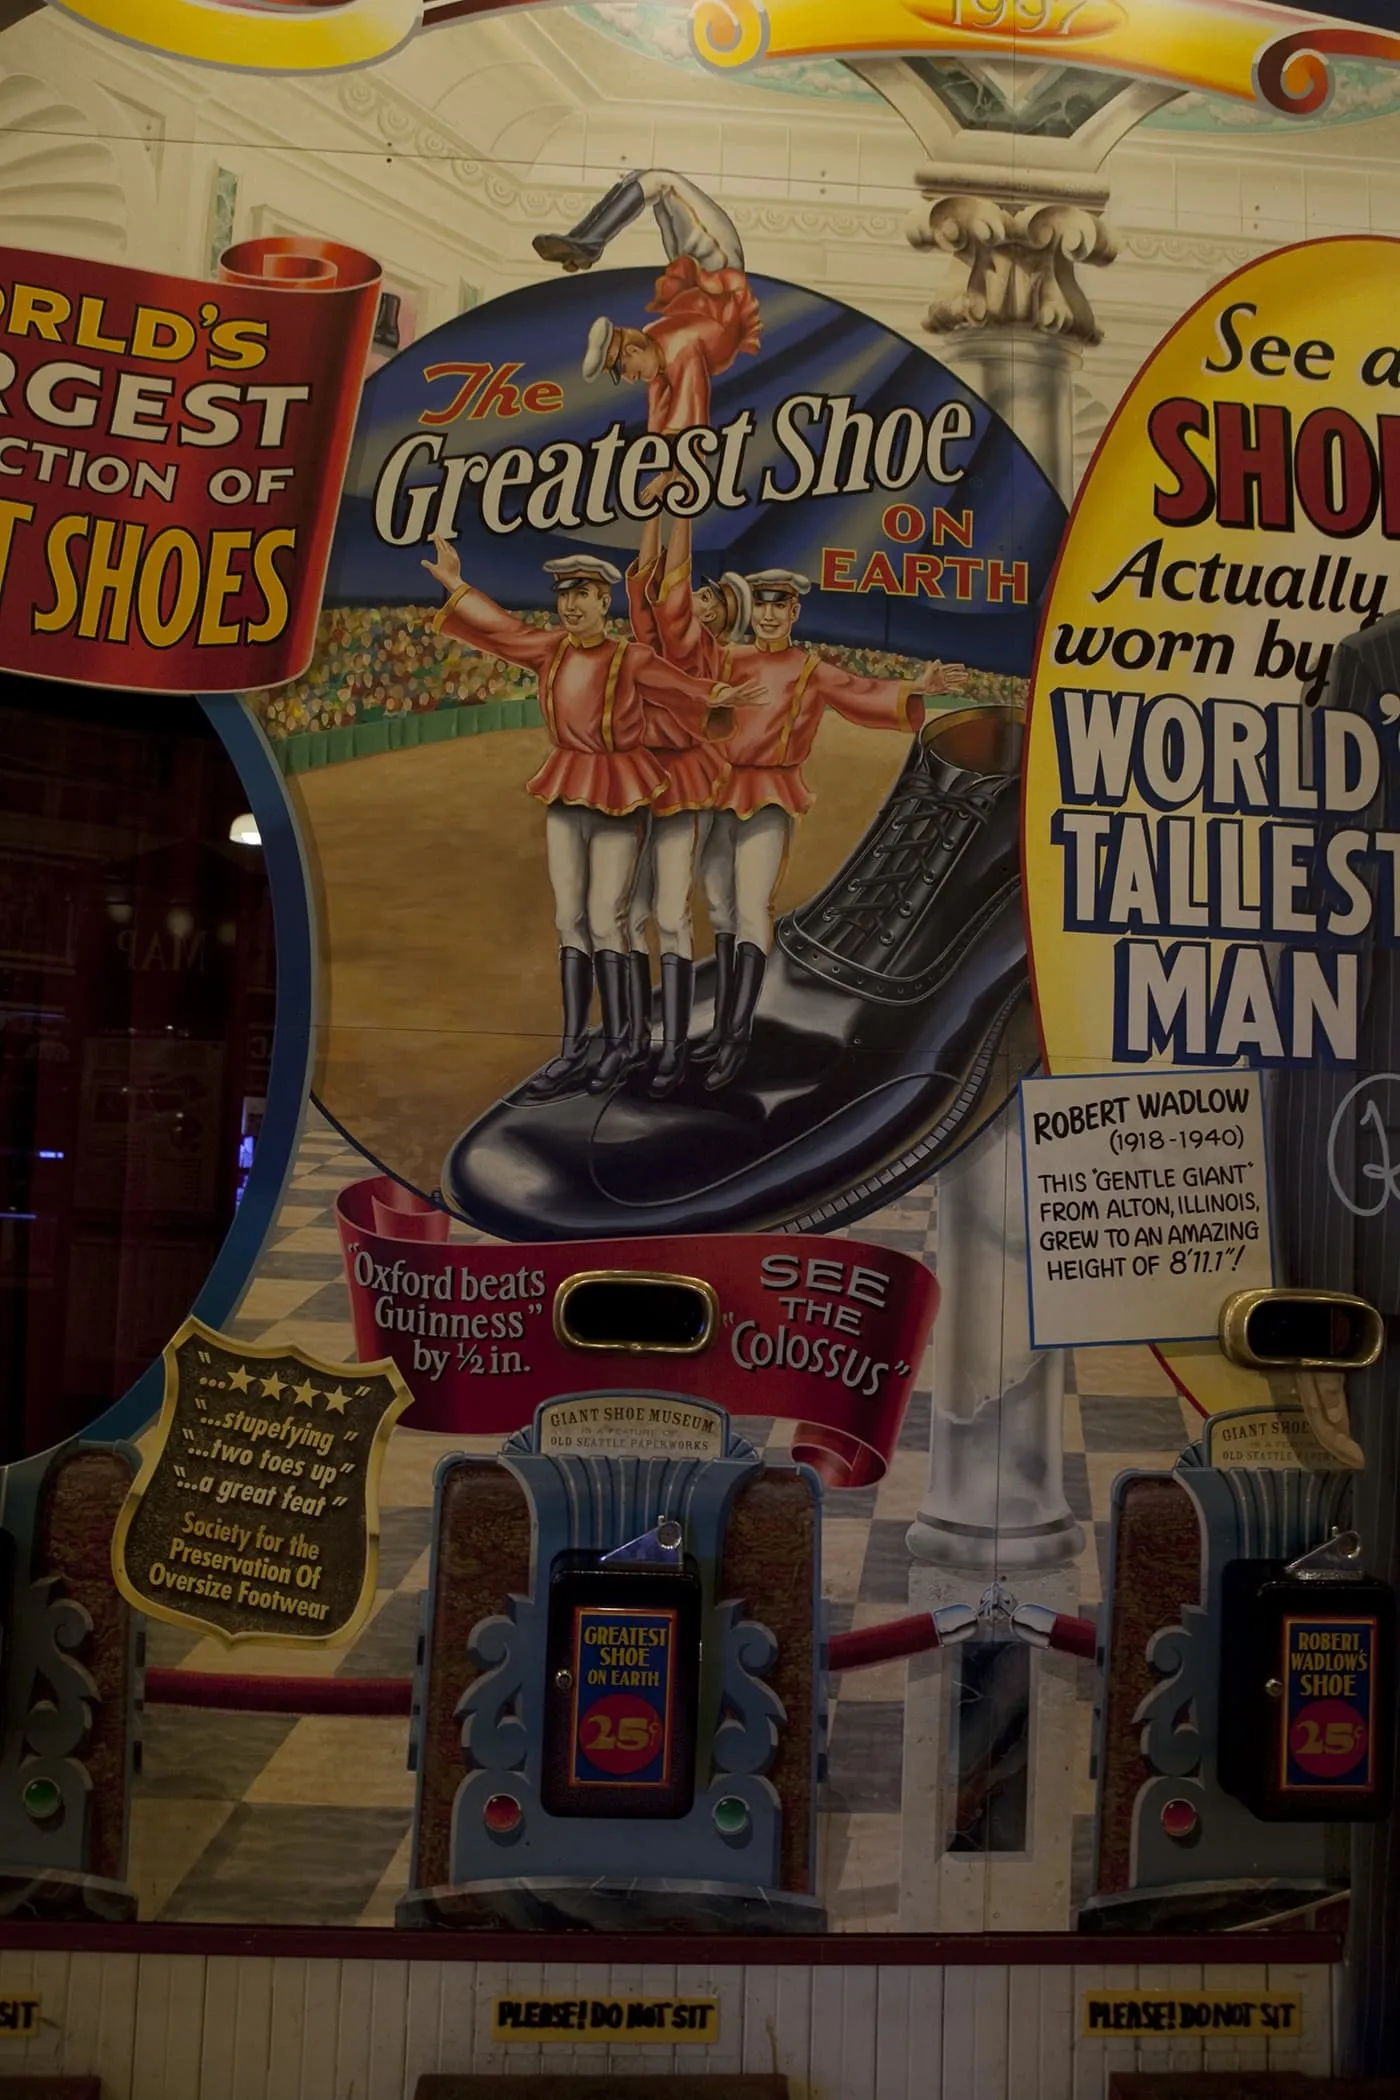 The Greatest Shoe on Earth, the Colossus, at The World Famous Giant Shoe Museum in Pike Place Market in Seattle, Washington.